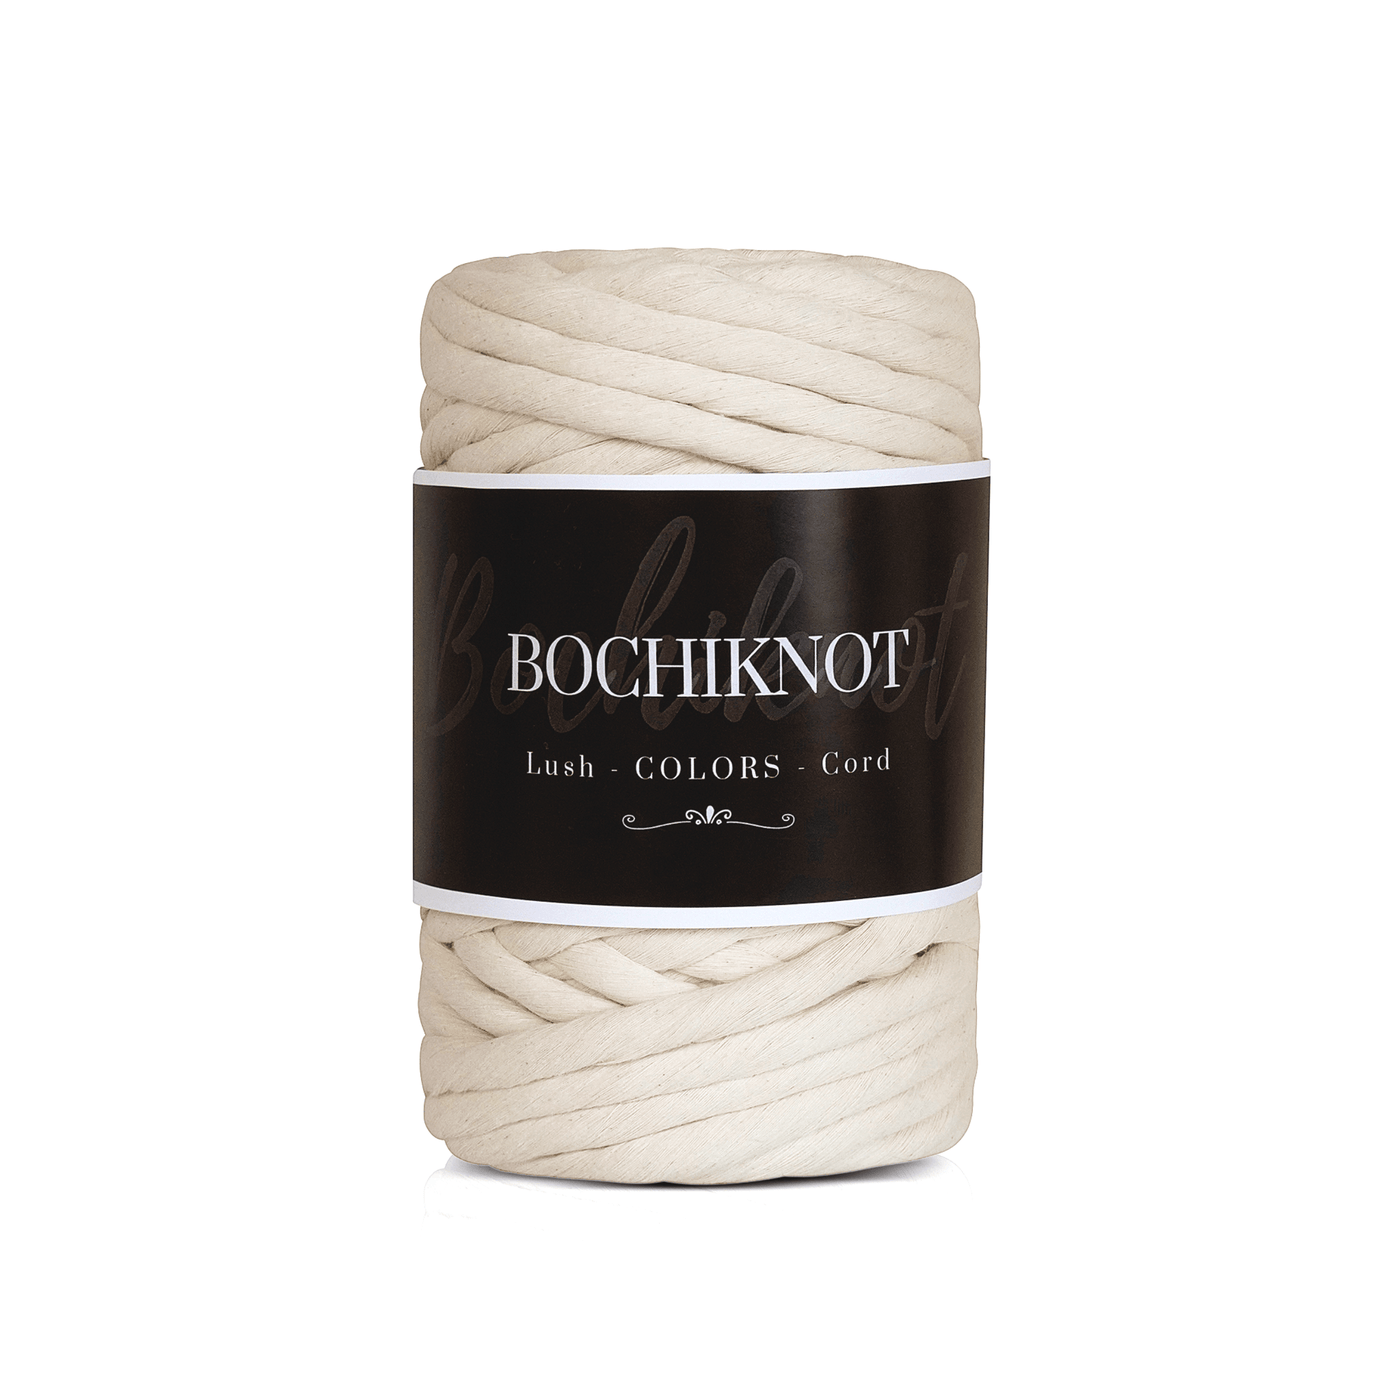  BOCHIKNOT 5mm Macrame Cord - Single Strand Macrame Cord -  Cotton Cord For Macrame & Knotting - Macrame Rope Supplies In 3mm 4mm 5mm  For Crafts, Wall Hangings, Plant Hangers